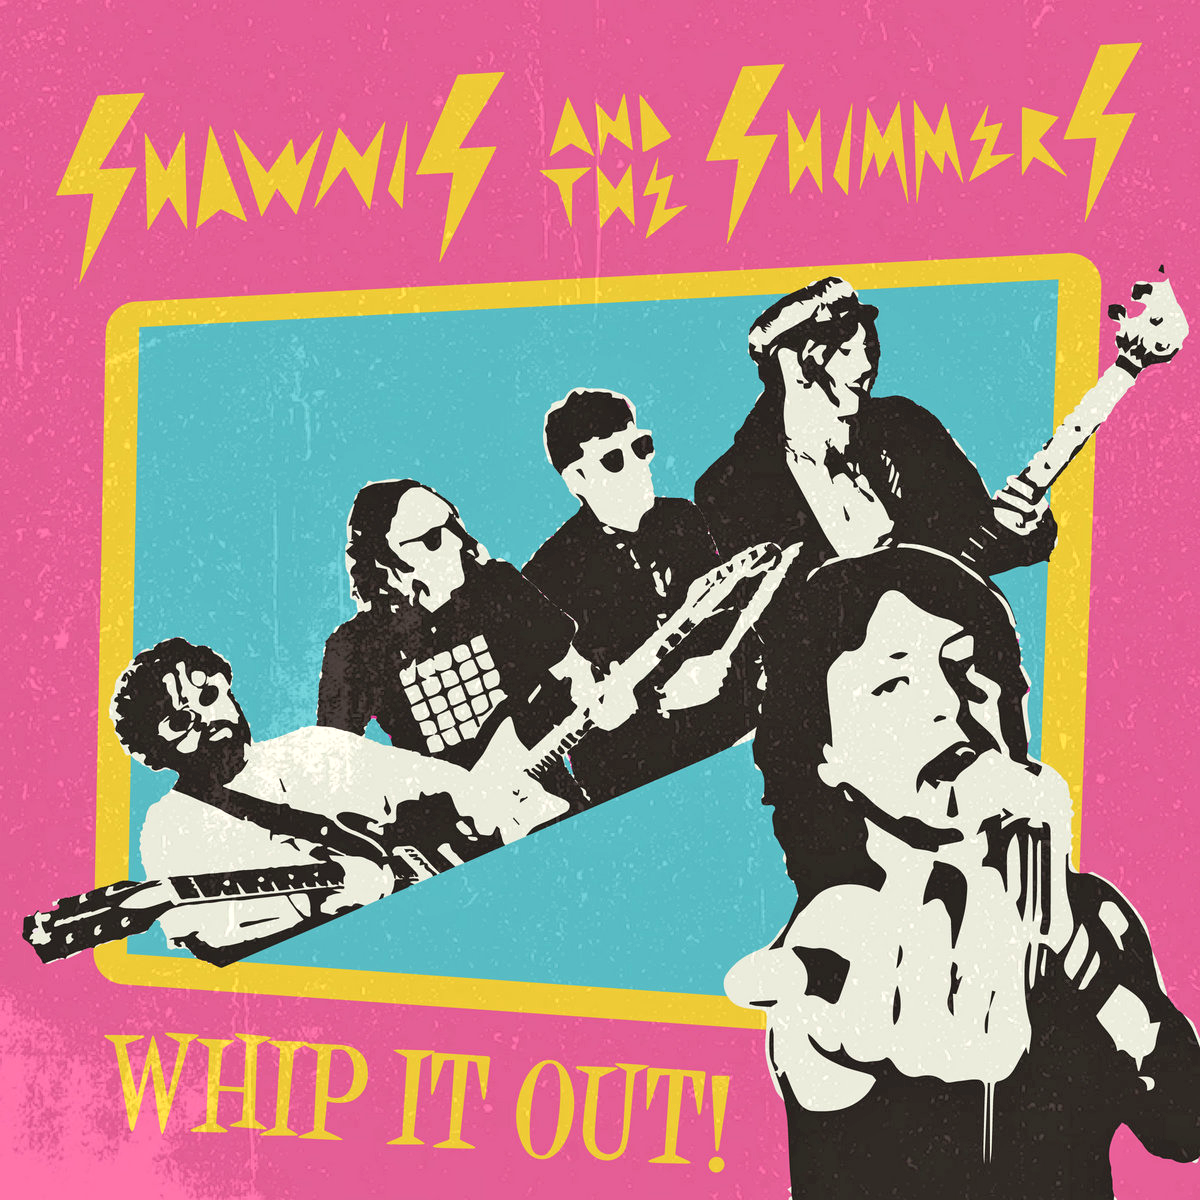 Shawnis And The Shimmers- Whip It Out! 7"